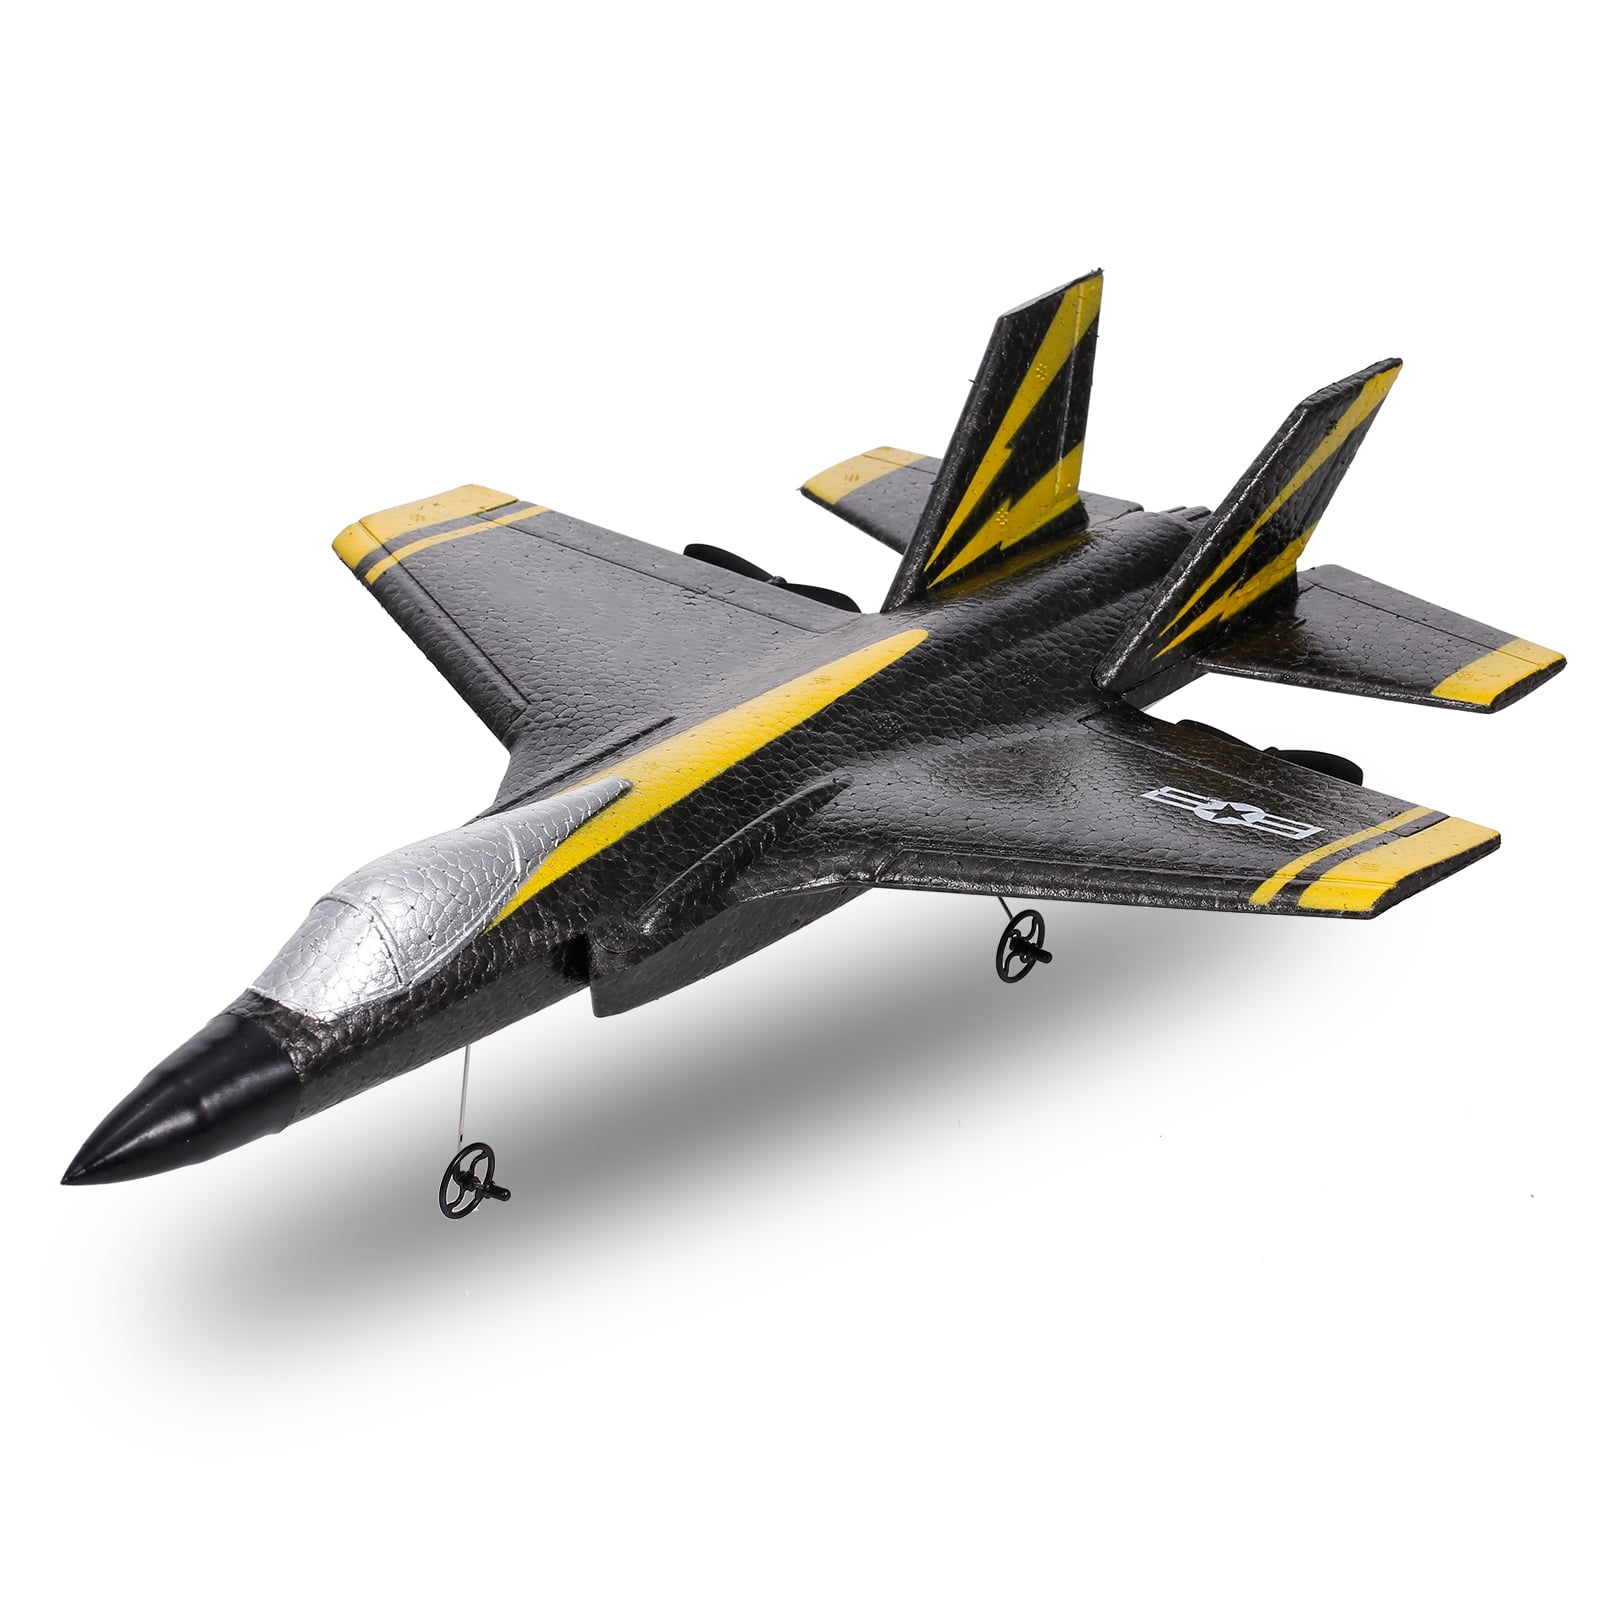 RC Plane For Adults & Kids Remote Control Airplane 2.4G 2 Channel EPP Foam Airplane Model Remote Control Fighter Jet Airplane RC Aircraft Easy To Fly For Kids & Beginners With Balance Gyroscope 